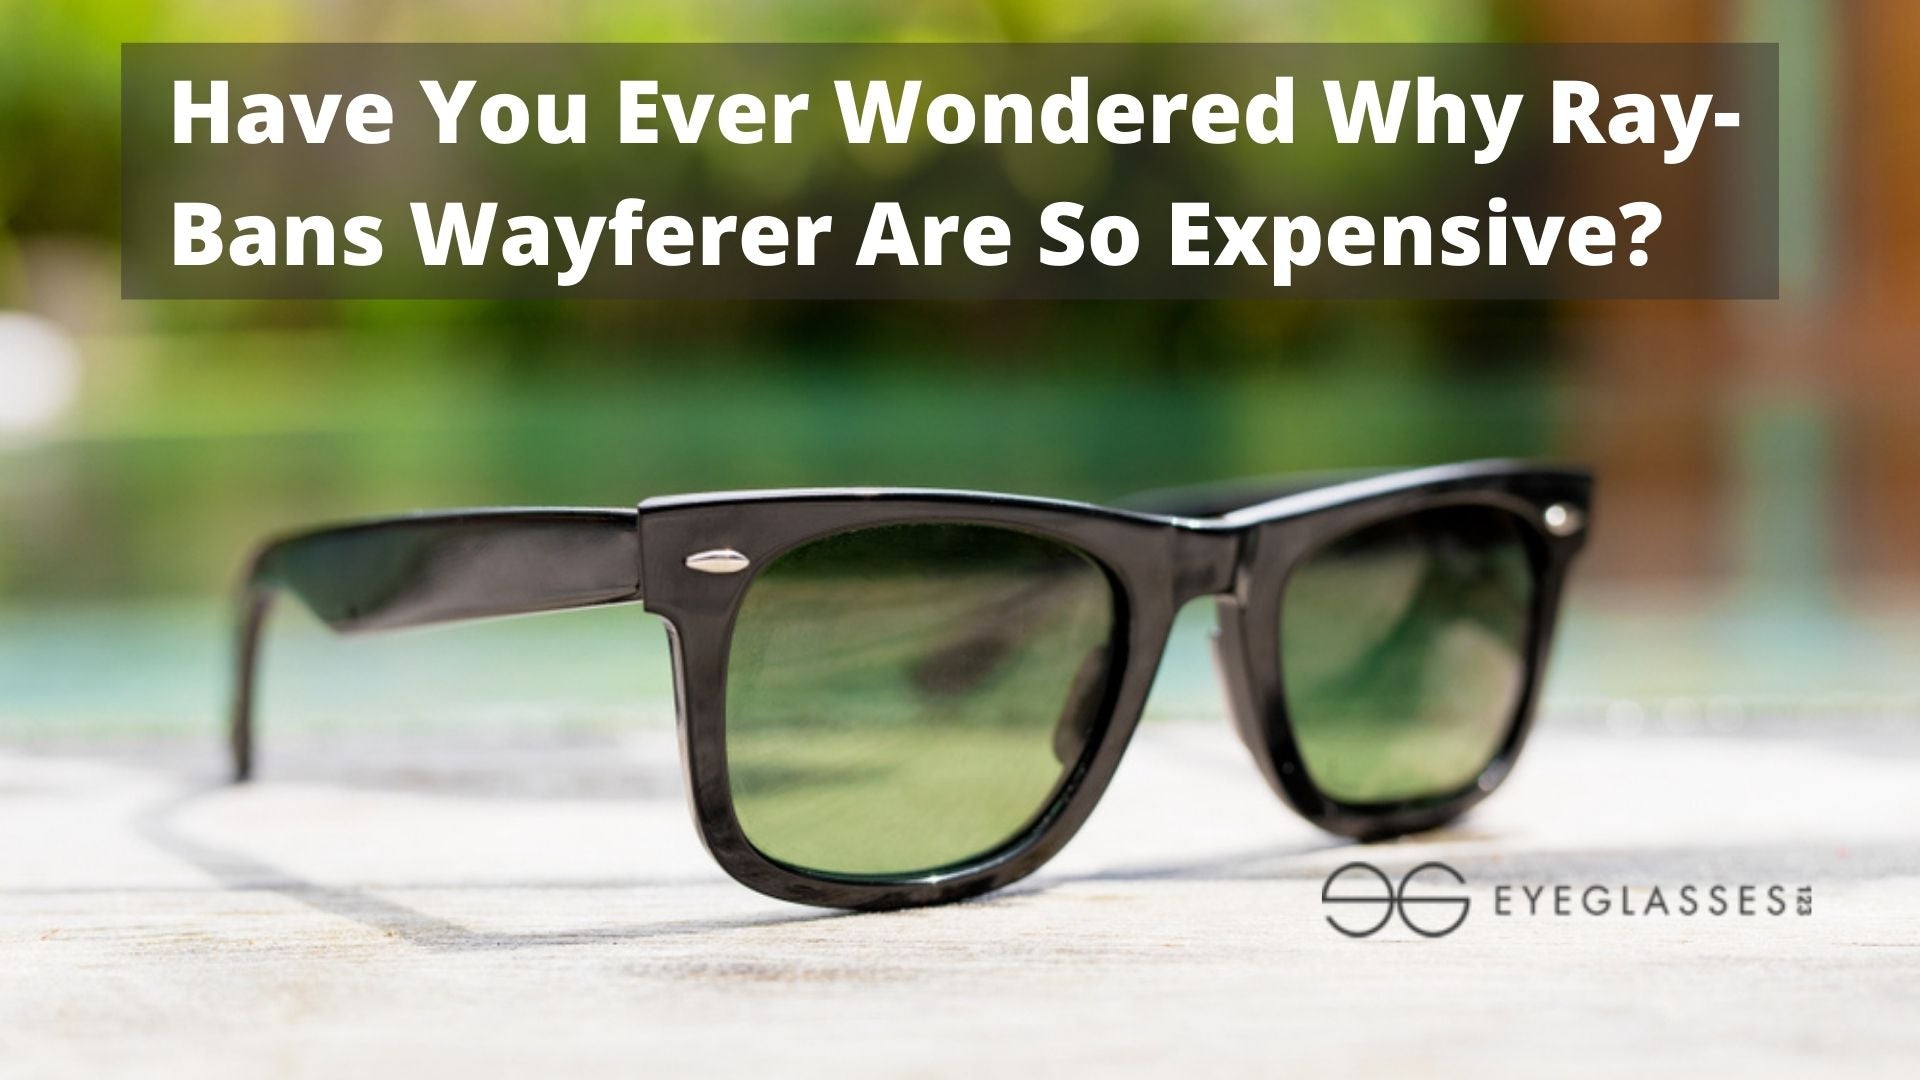 Have You Ever Wondered Why Ray-Bans Wayferer Are So Expensive